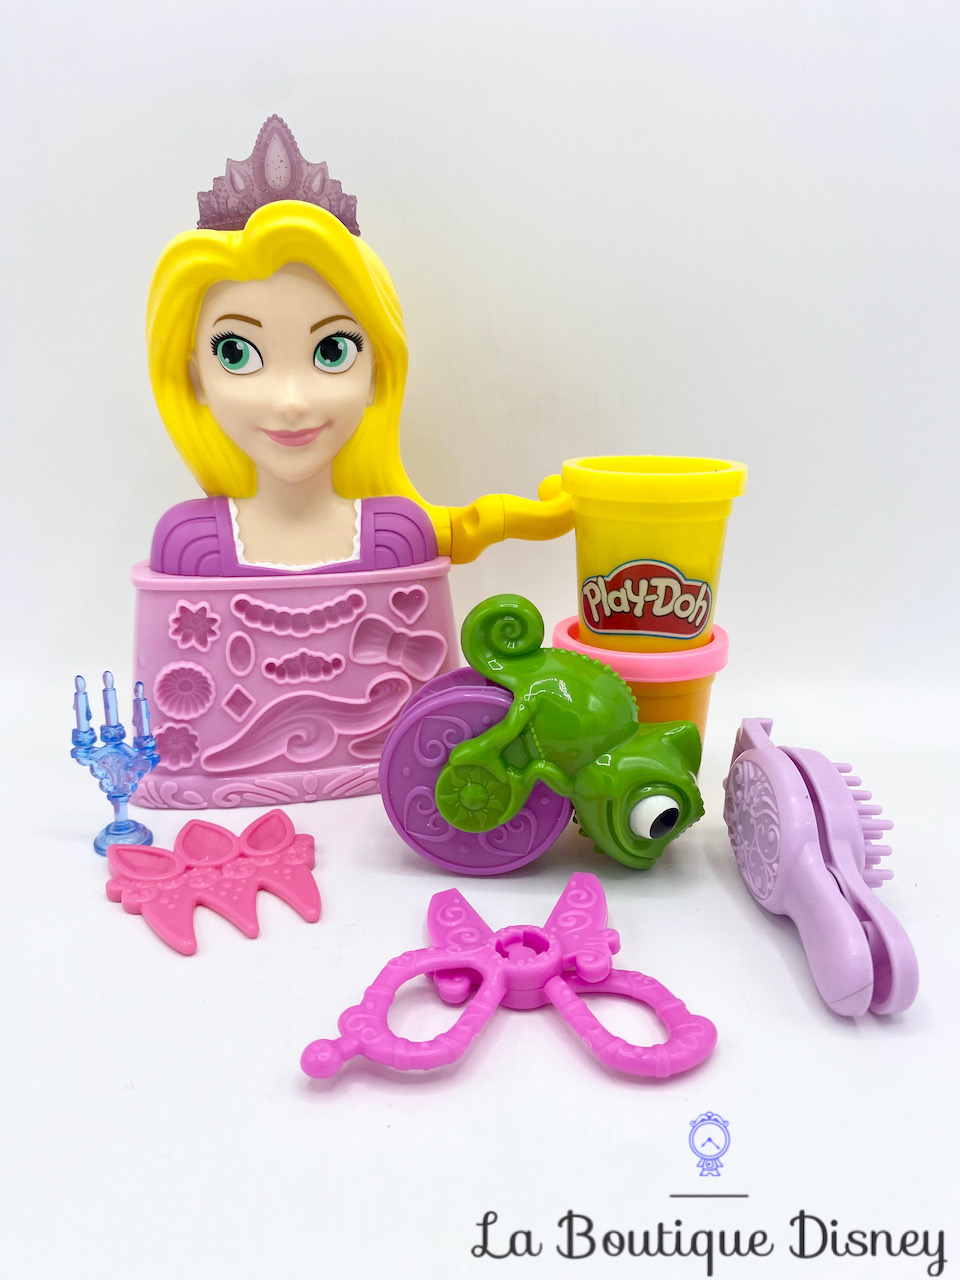 jouet-pate-a-modeler-play-doh-raiponce-tete-a-coiffer-coiffure-royale-pascal-2